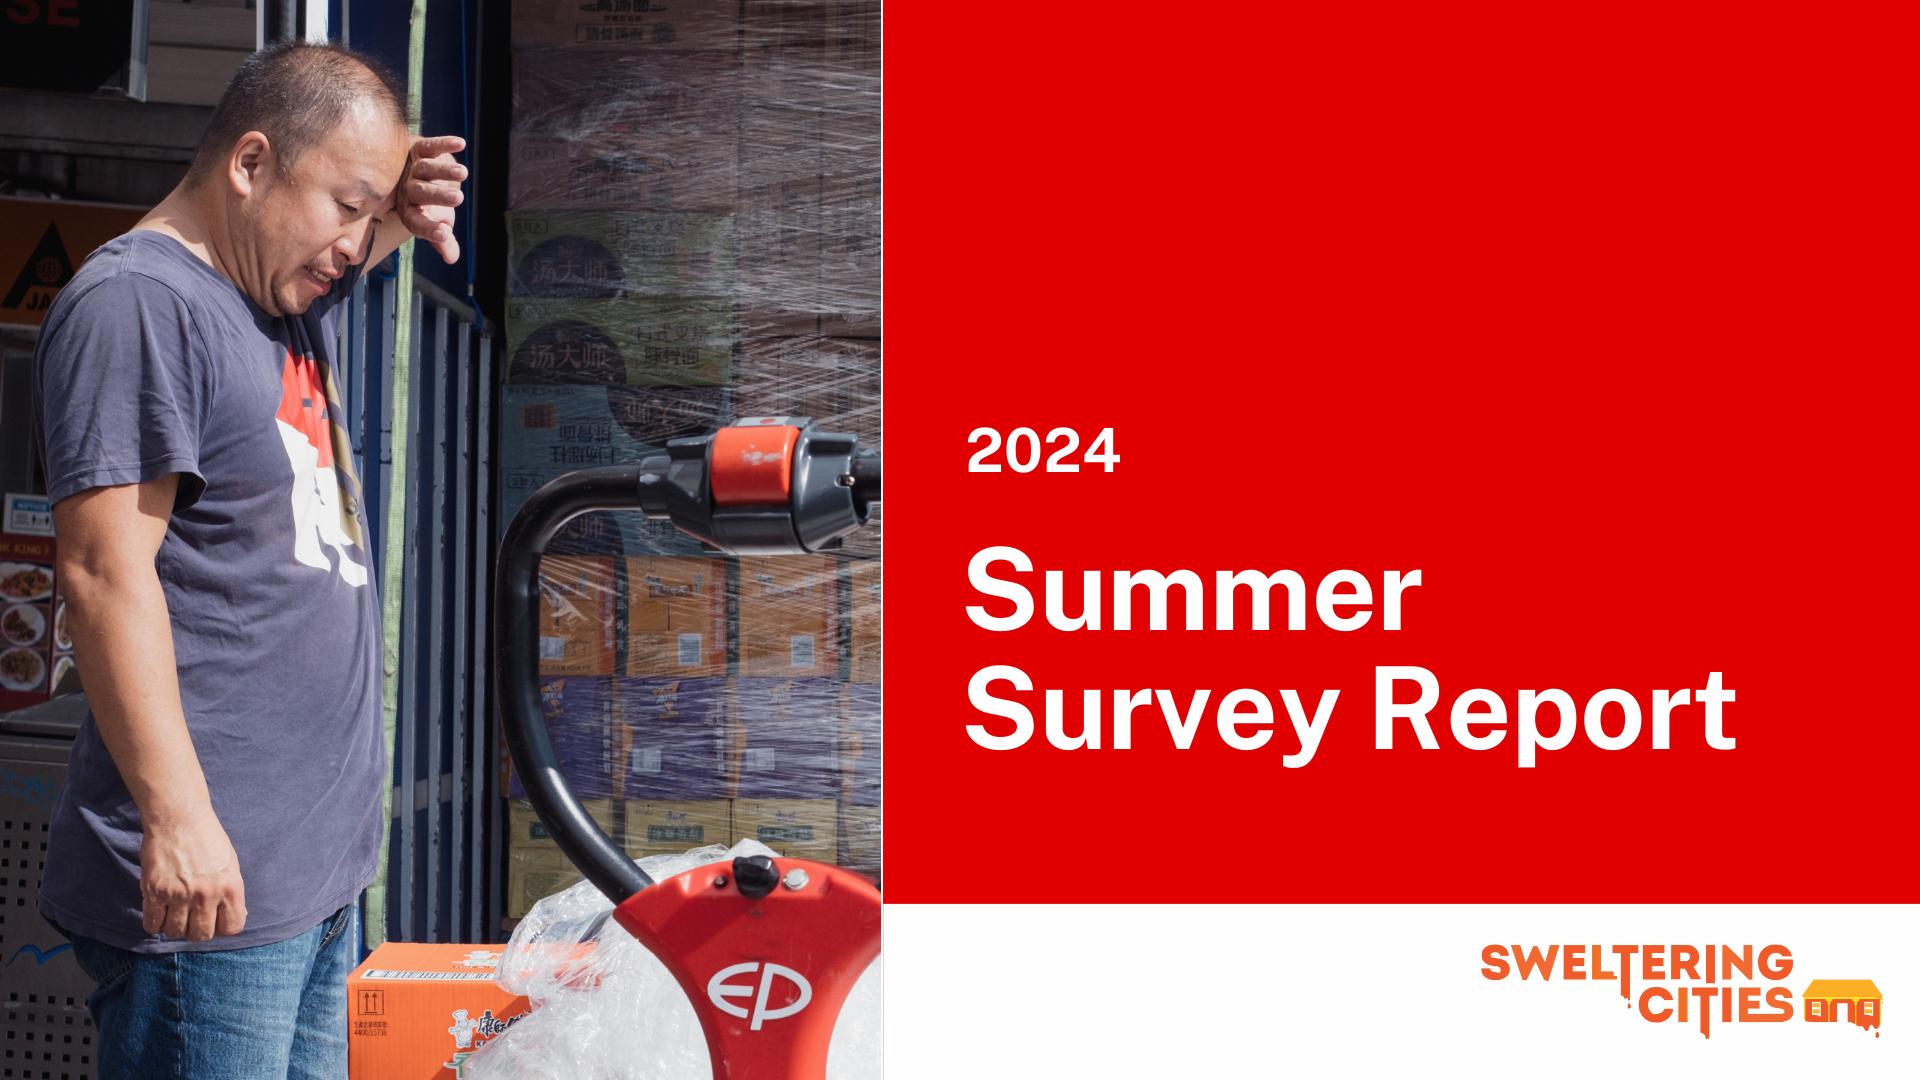 Summer Survey 2024 report released today!